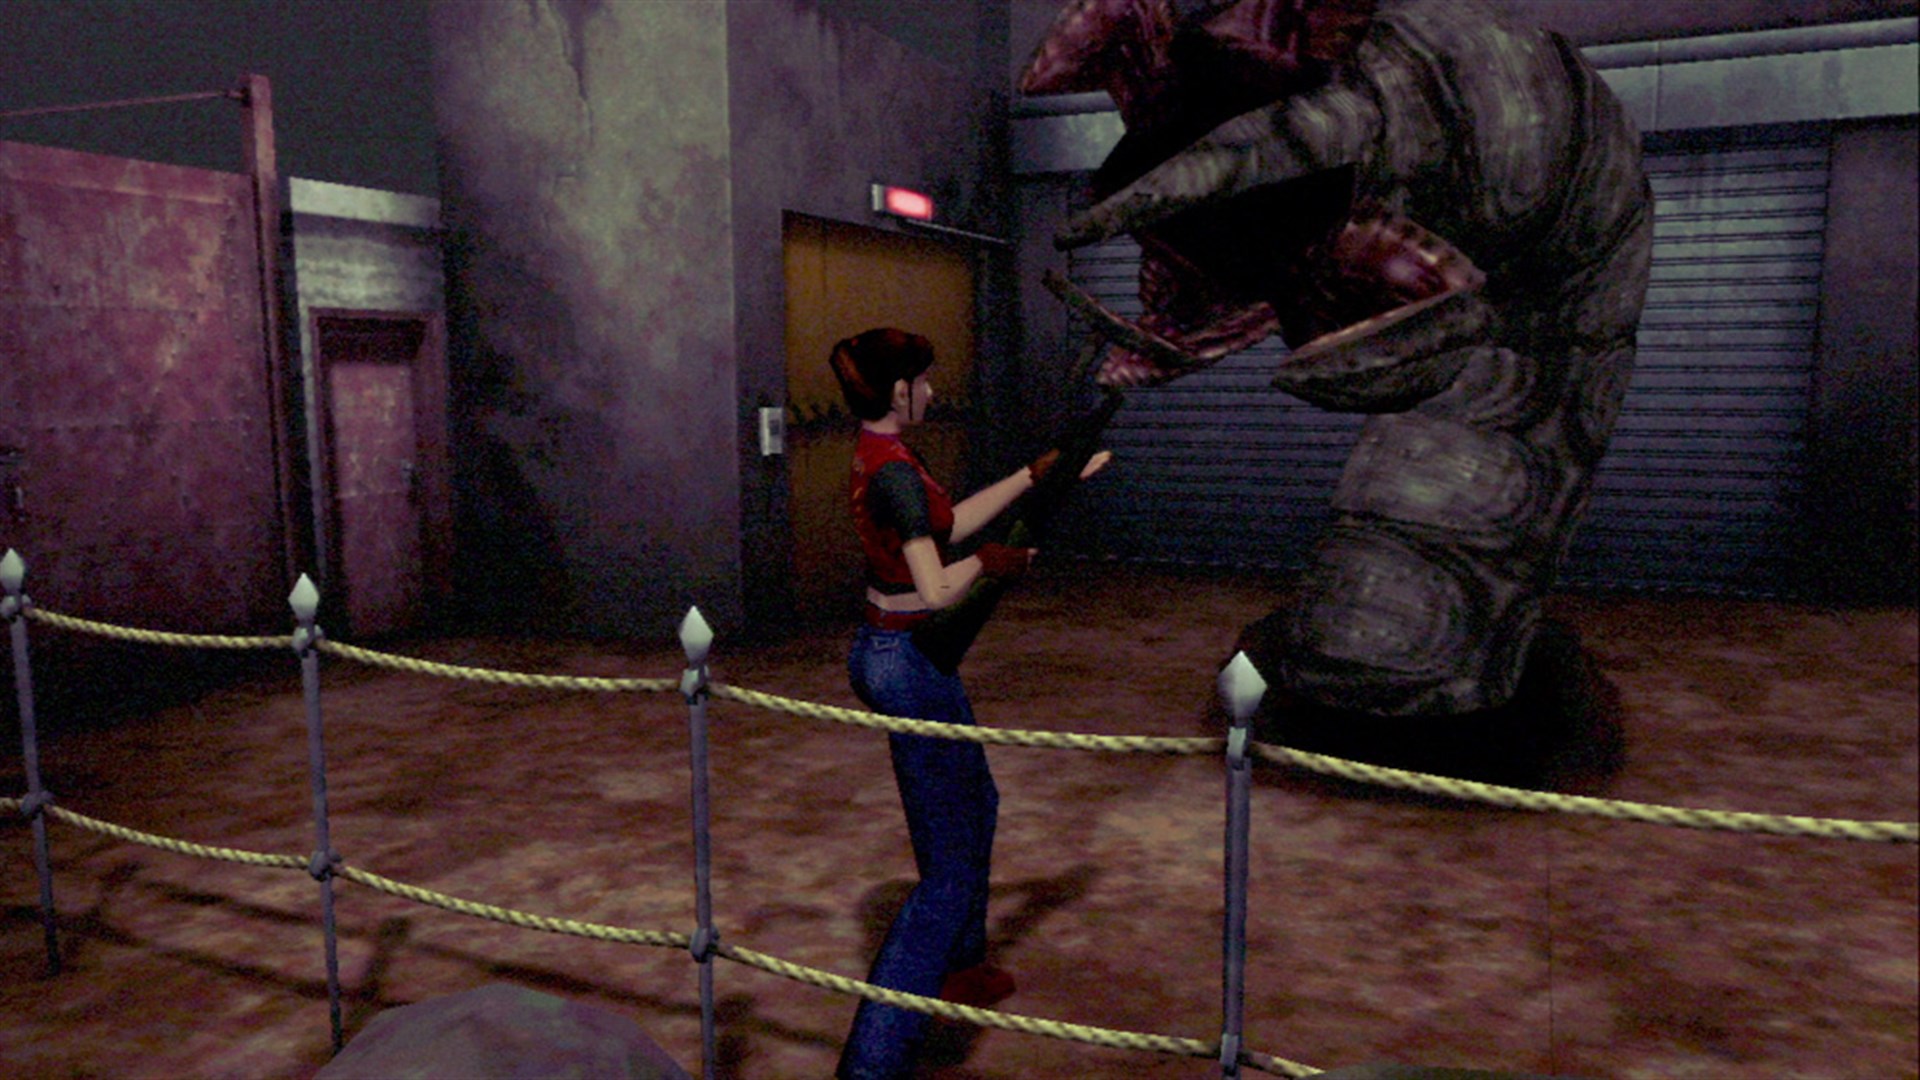 Resident Evil Code: Veronica X Review